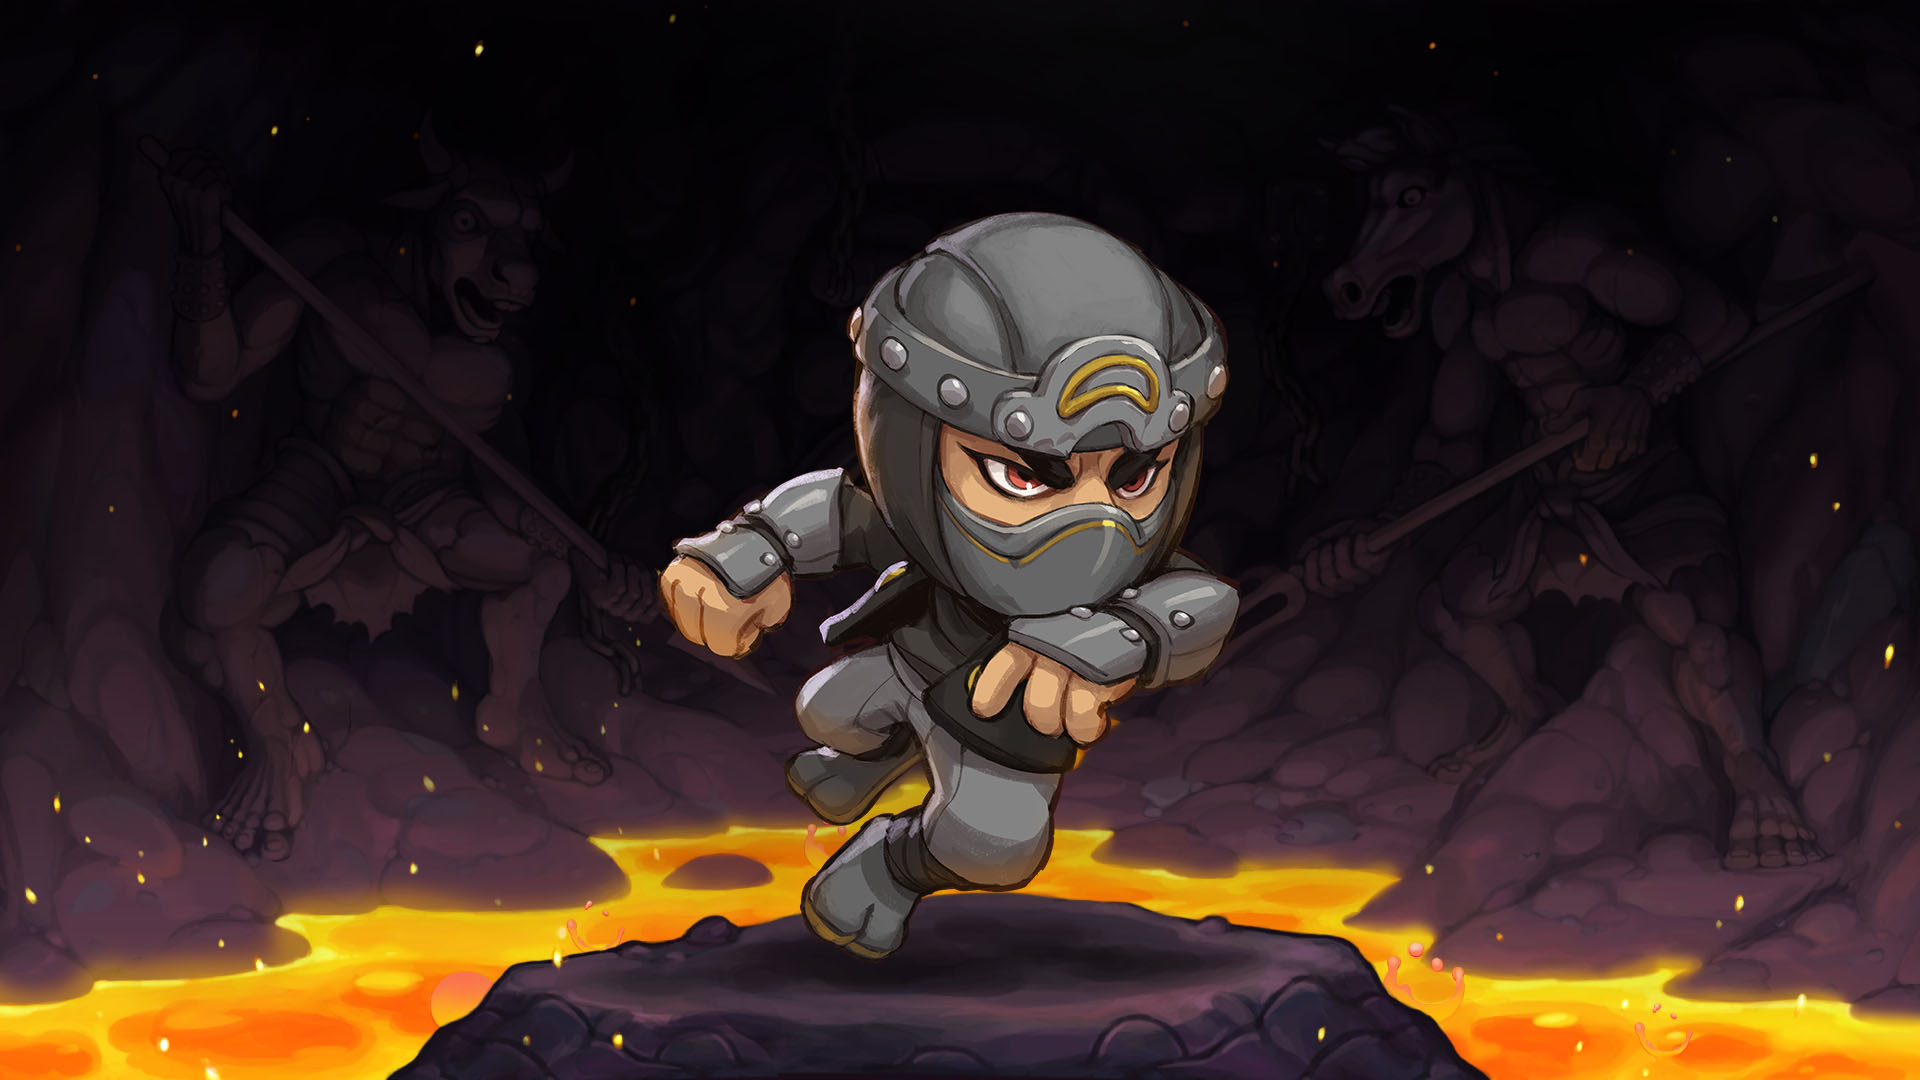 Video Game Spelunky 2 HD Wallpaper Background Image.